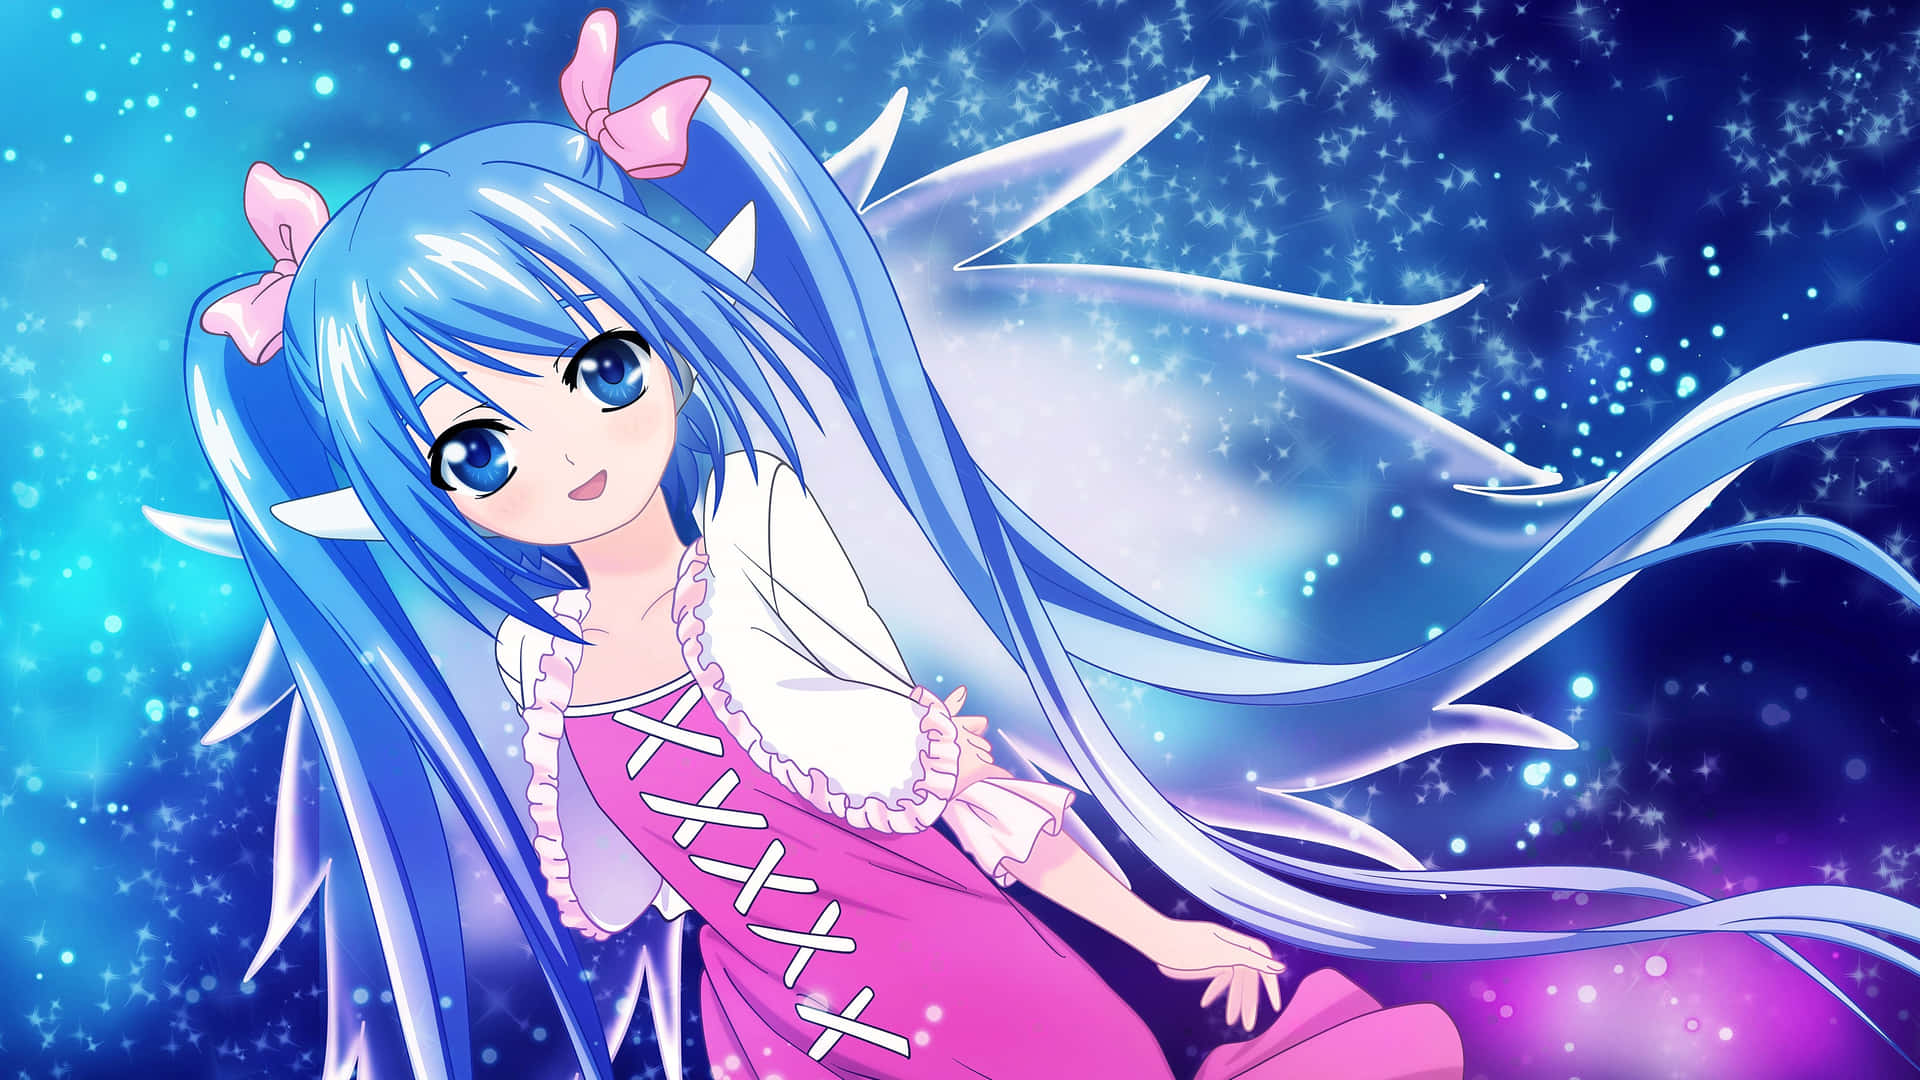 Anime Girl With Blue Hair And Pink Dress Wallpaper